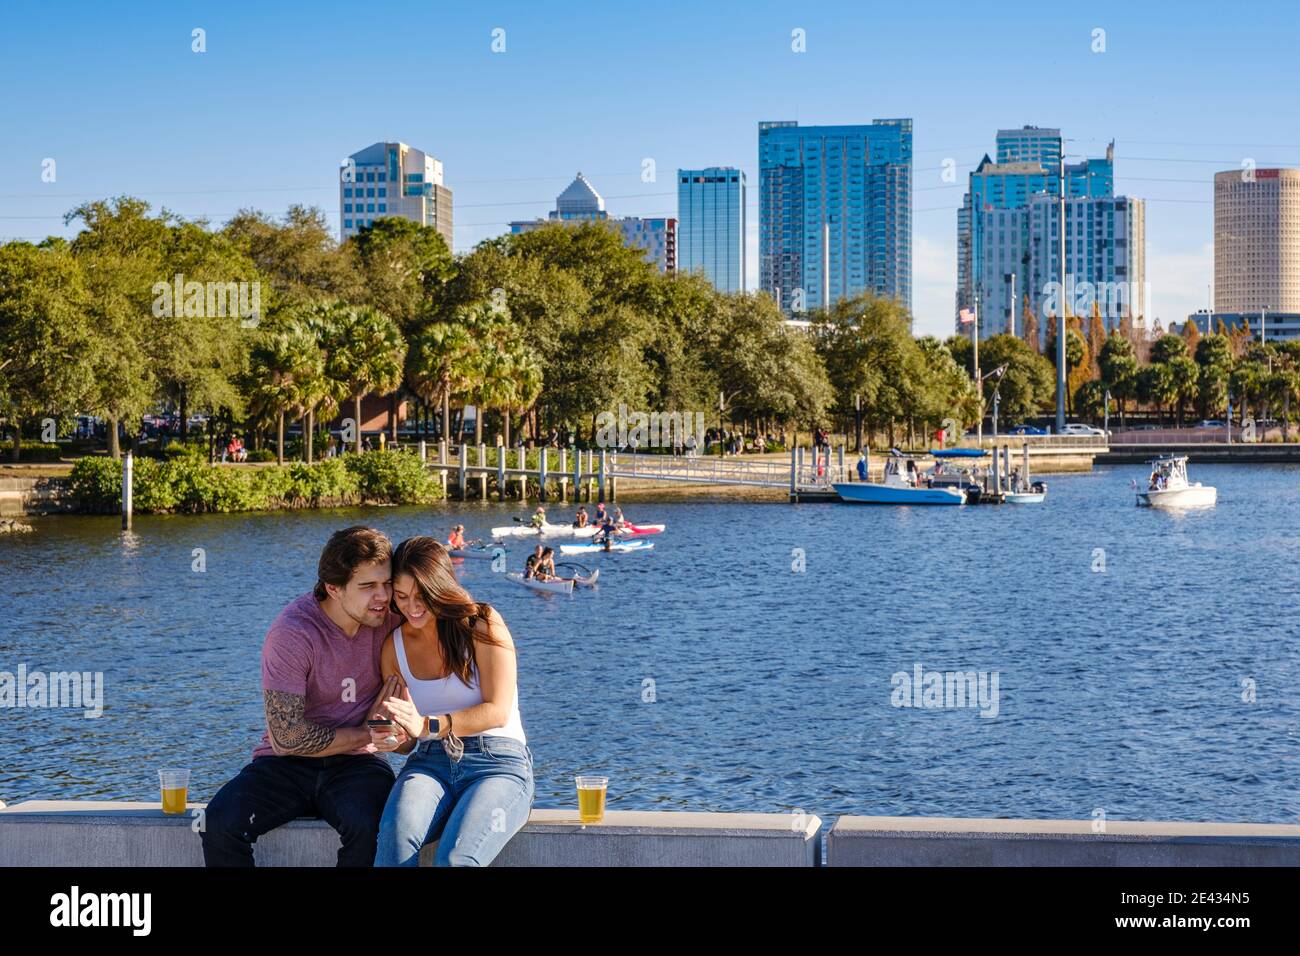 Couple enjoying a moment on their smartphone at the Tampa Riverwalk near Tampa Heights, Tampa, Florida. Tampa's first suburb established in 1883. Stock Photo